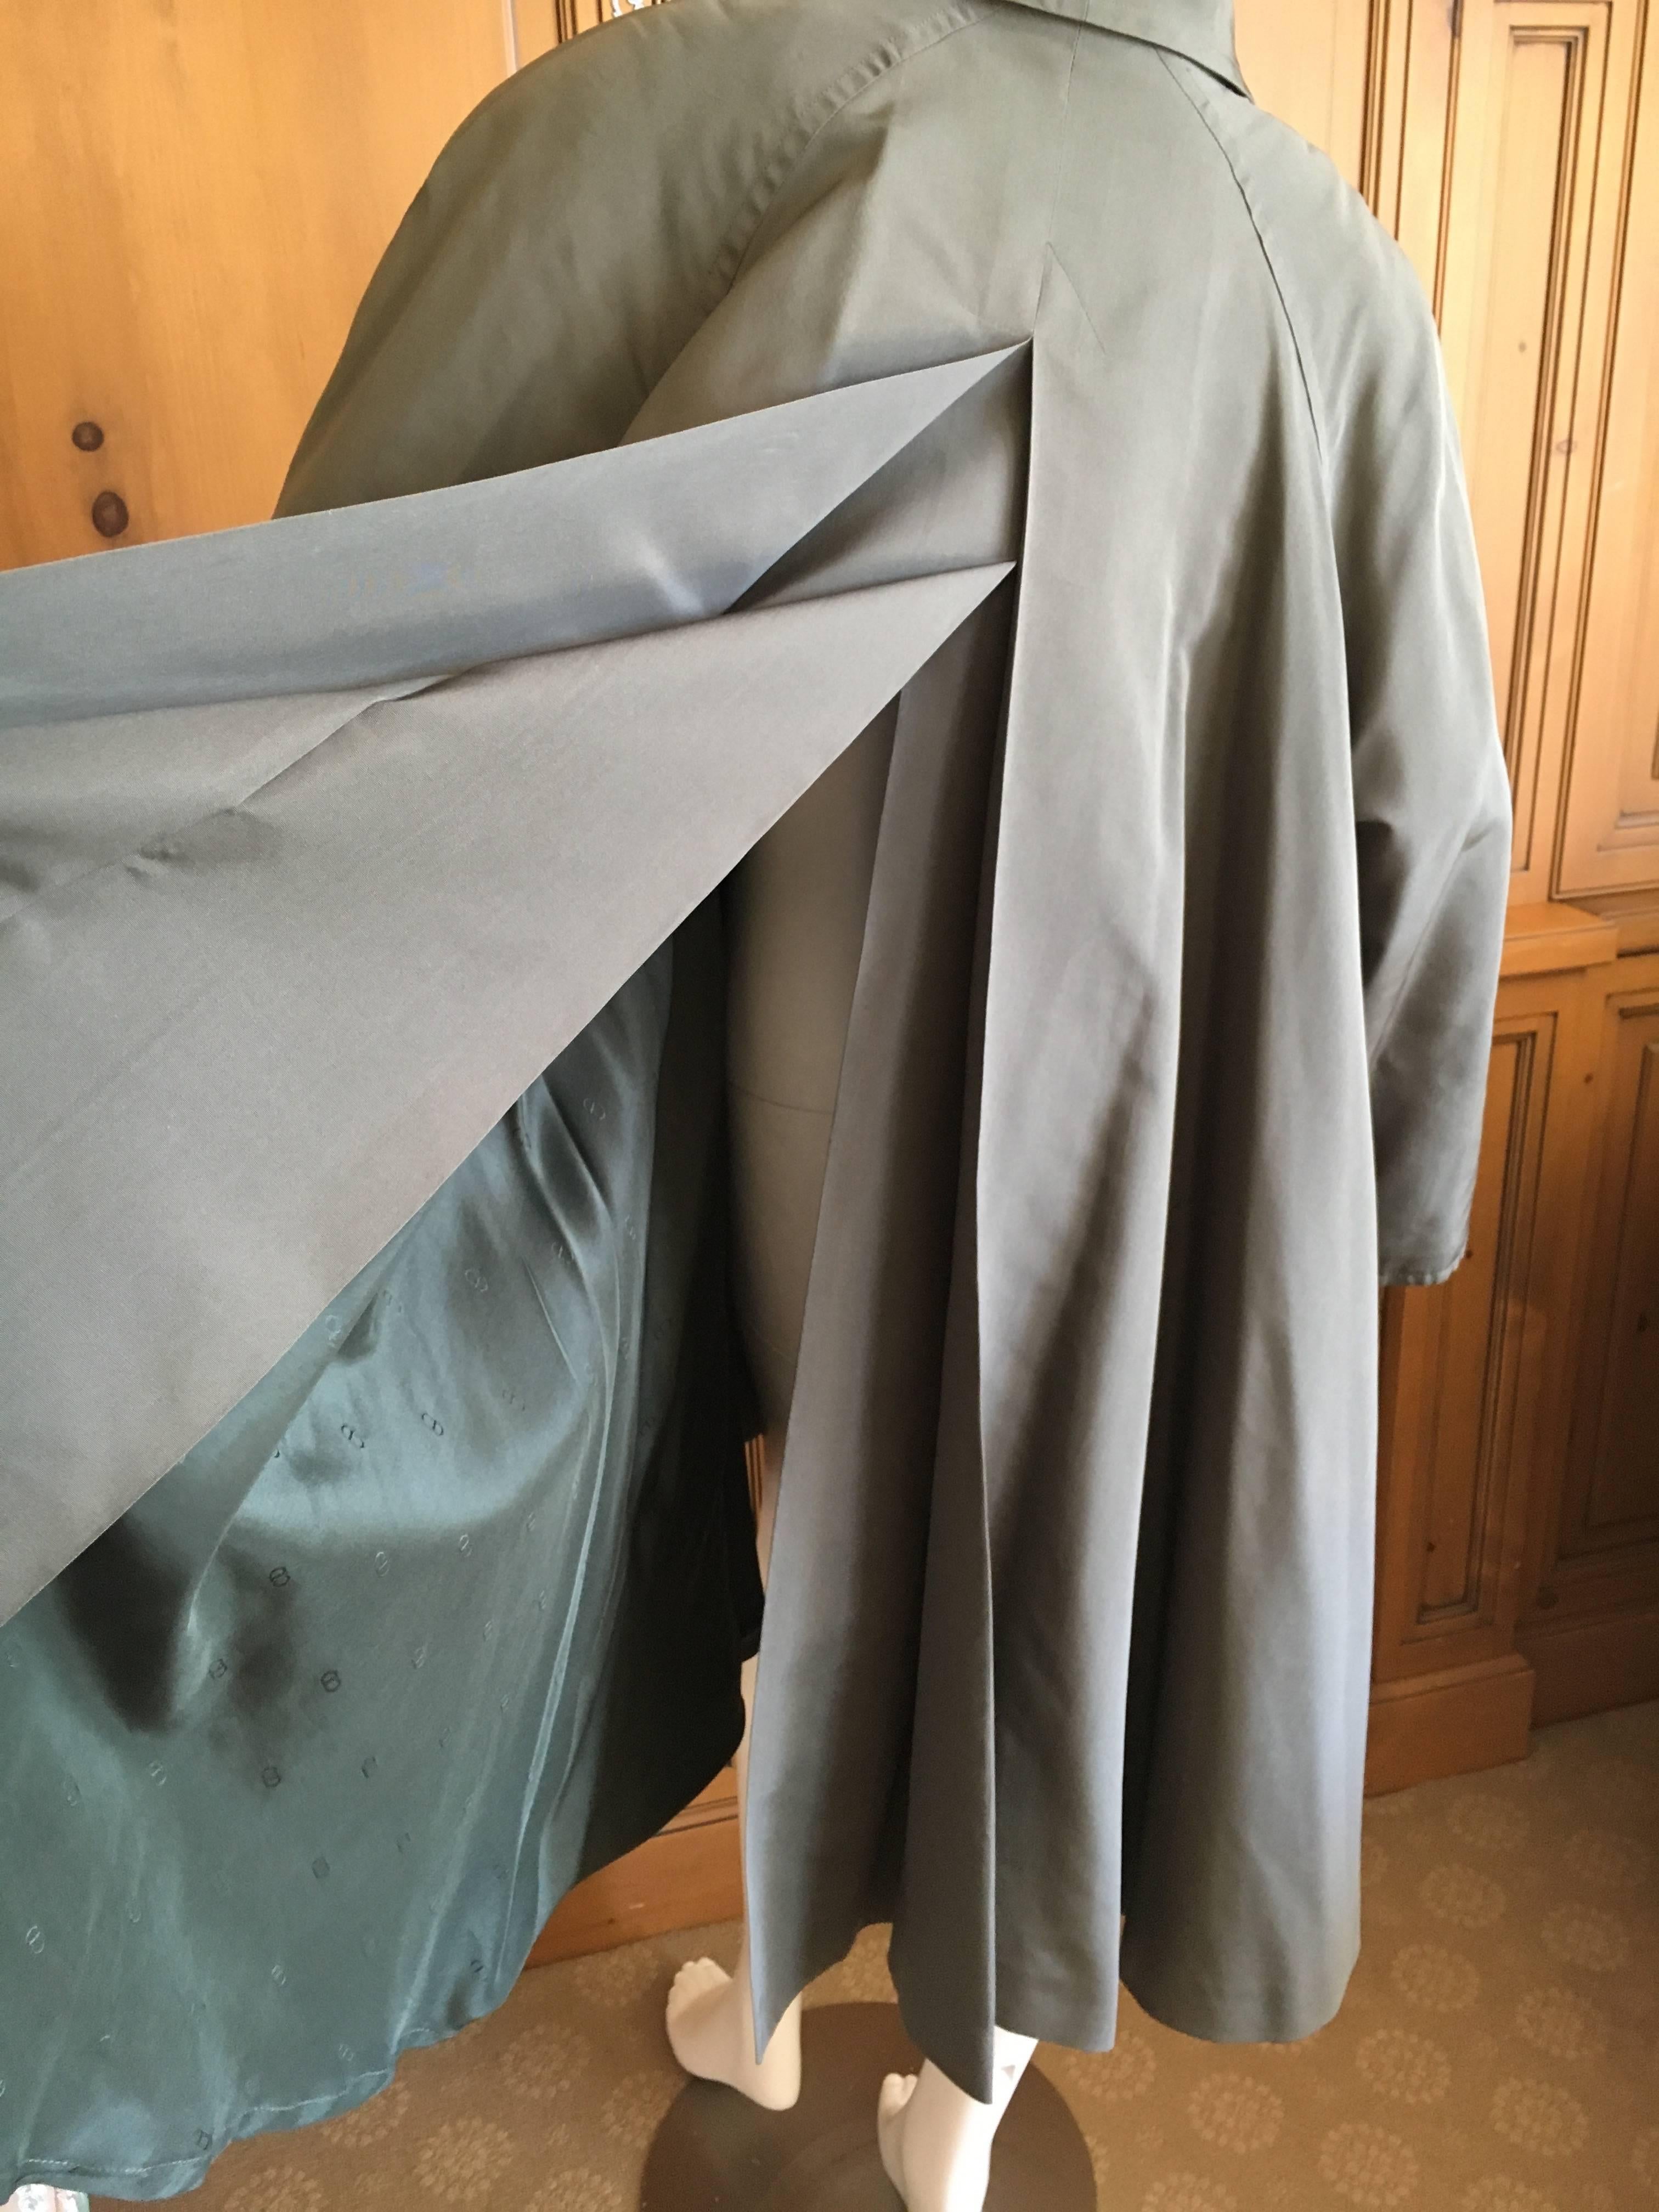 Christian Dior Gianfranco Ferre Era Silk Swing Belted Trench Coat In Good Condition For Sale In Cloverdale, CA